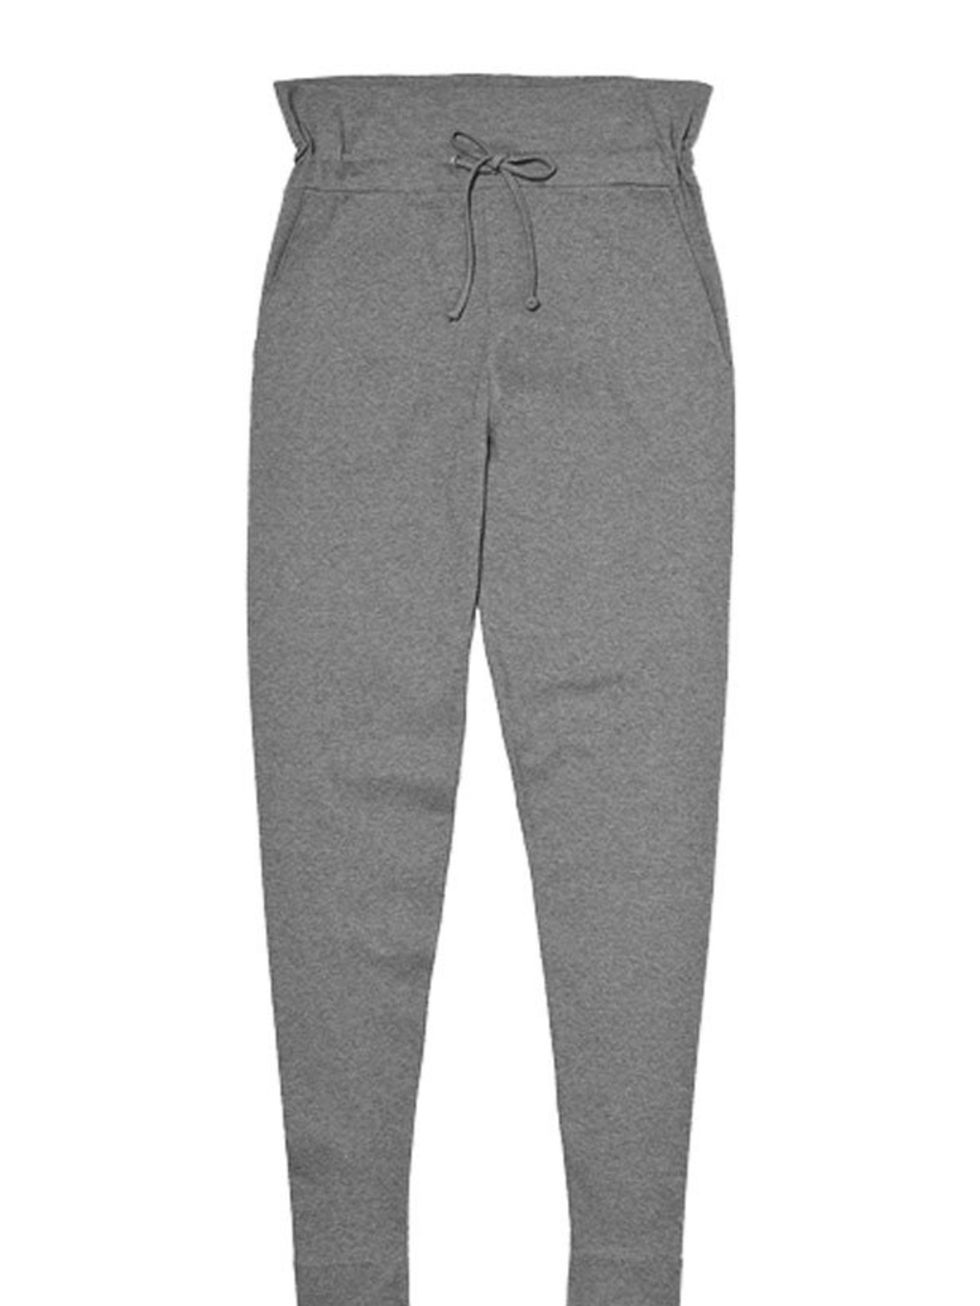 <p><a href="http://www.cosstores.com/Store/Women/New/Jersey_stirrup_trousers/365246-245772.1">Cos</a> stirrup pants, £40</p>